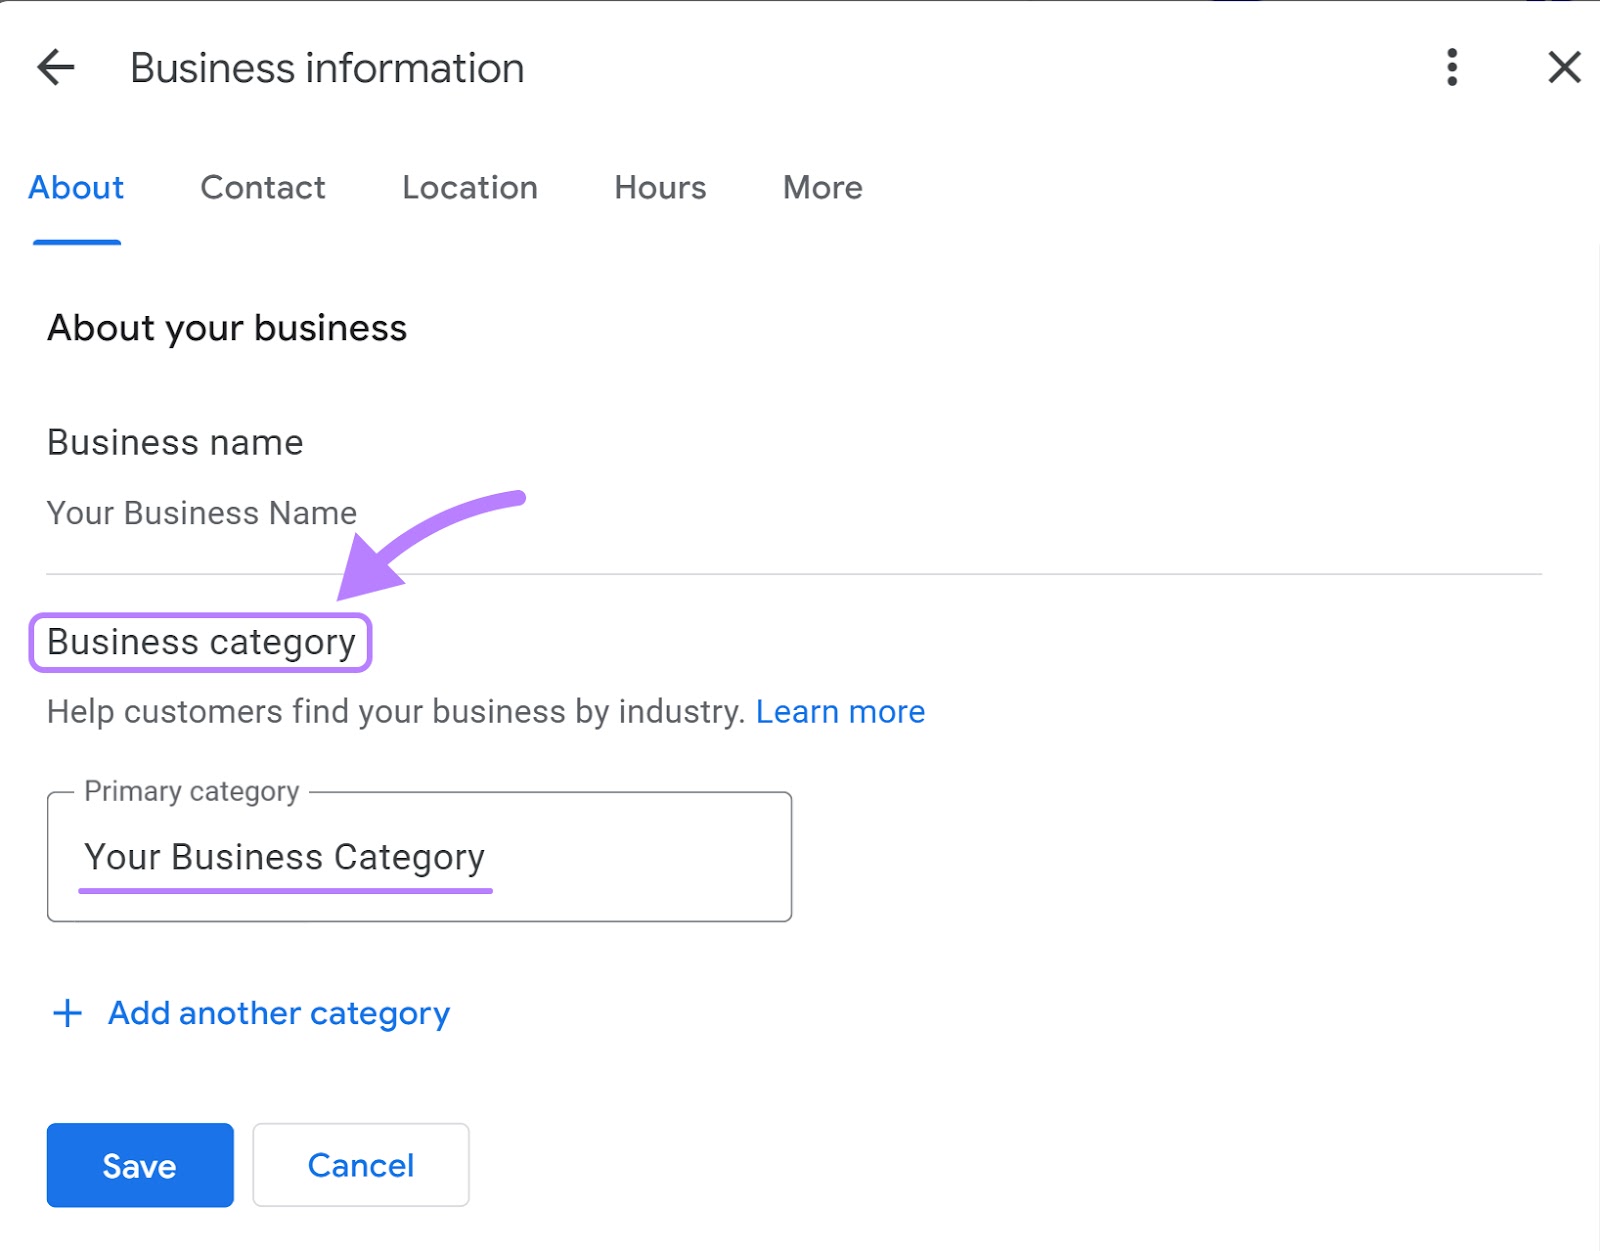 "Business category" section highlighted under "Business information" page